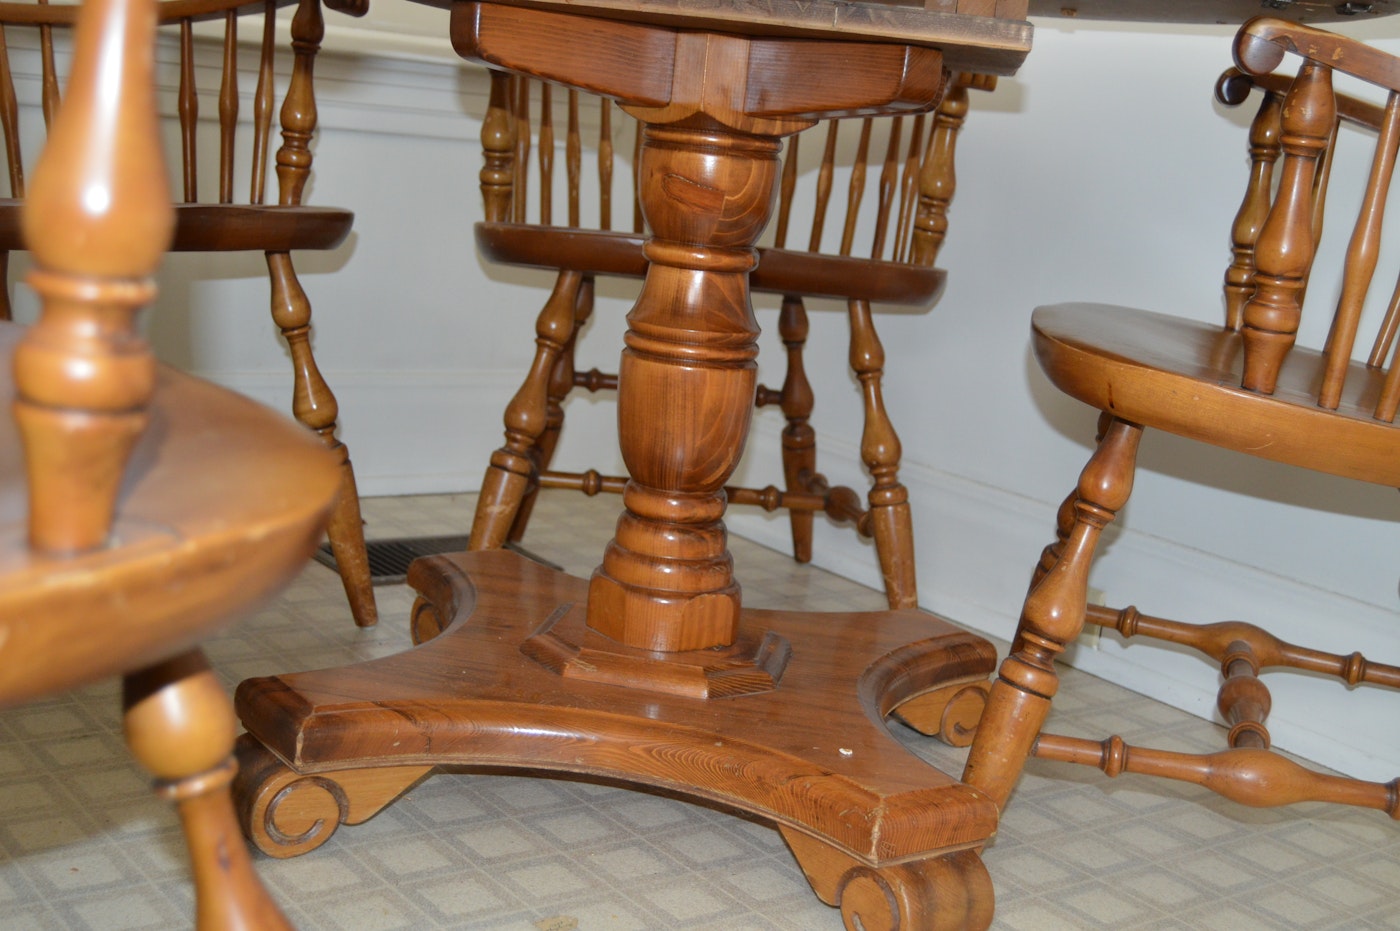 nichols and stone kitchen table and chair